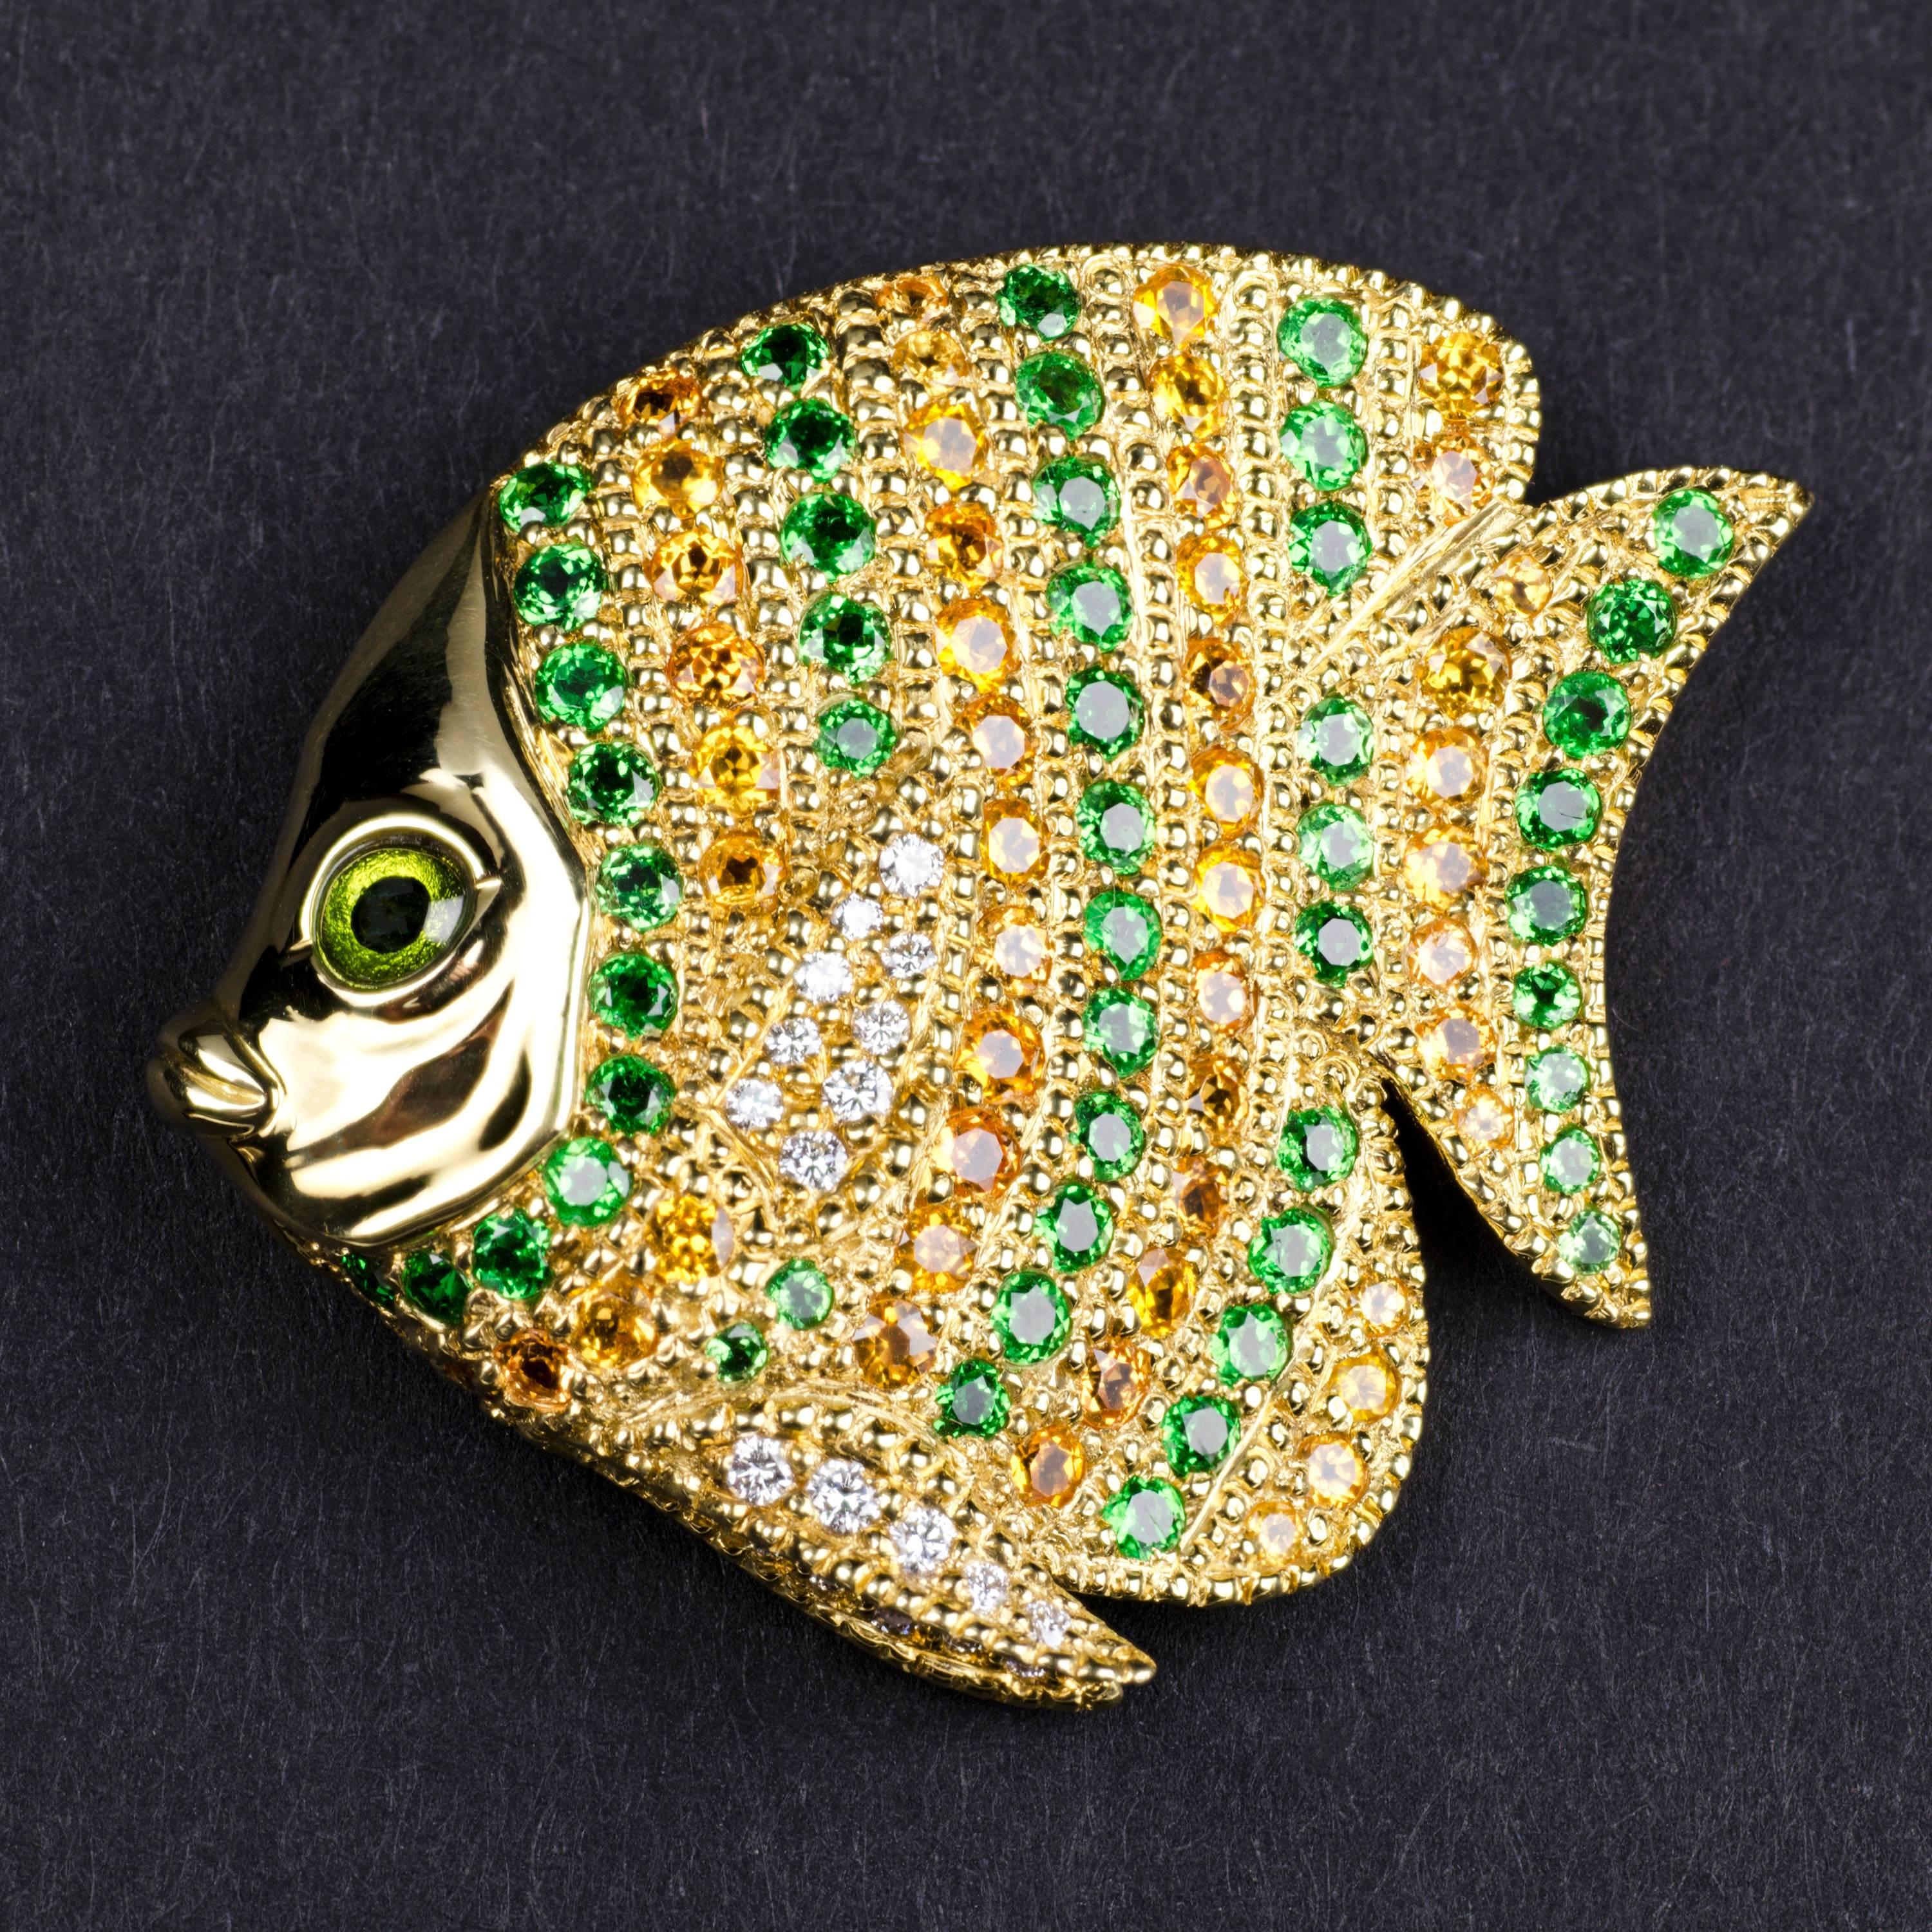 This richly textured and colourful tropical fish is an exclusive Henn design collaboration with master gemstone carver Alfred Zimmermann who is world-renowned for his superlative nature inspired carving. His creations are prized and sought after by